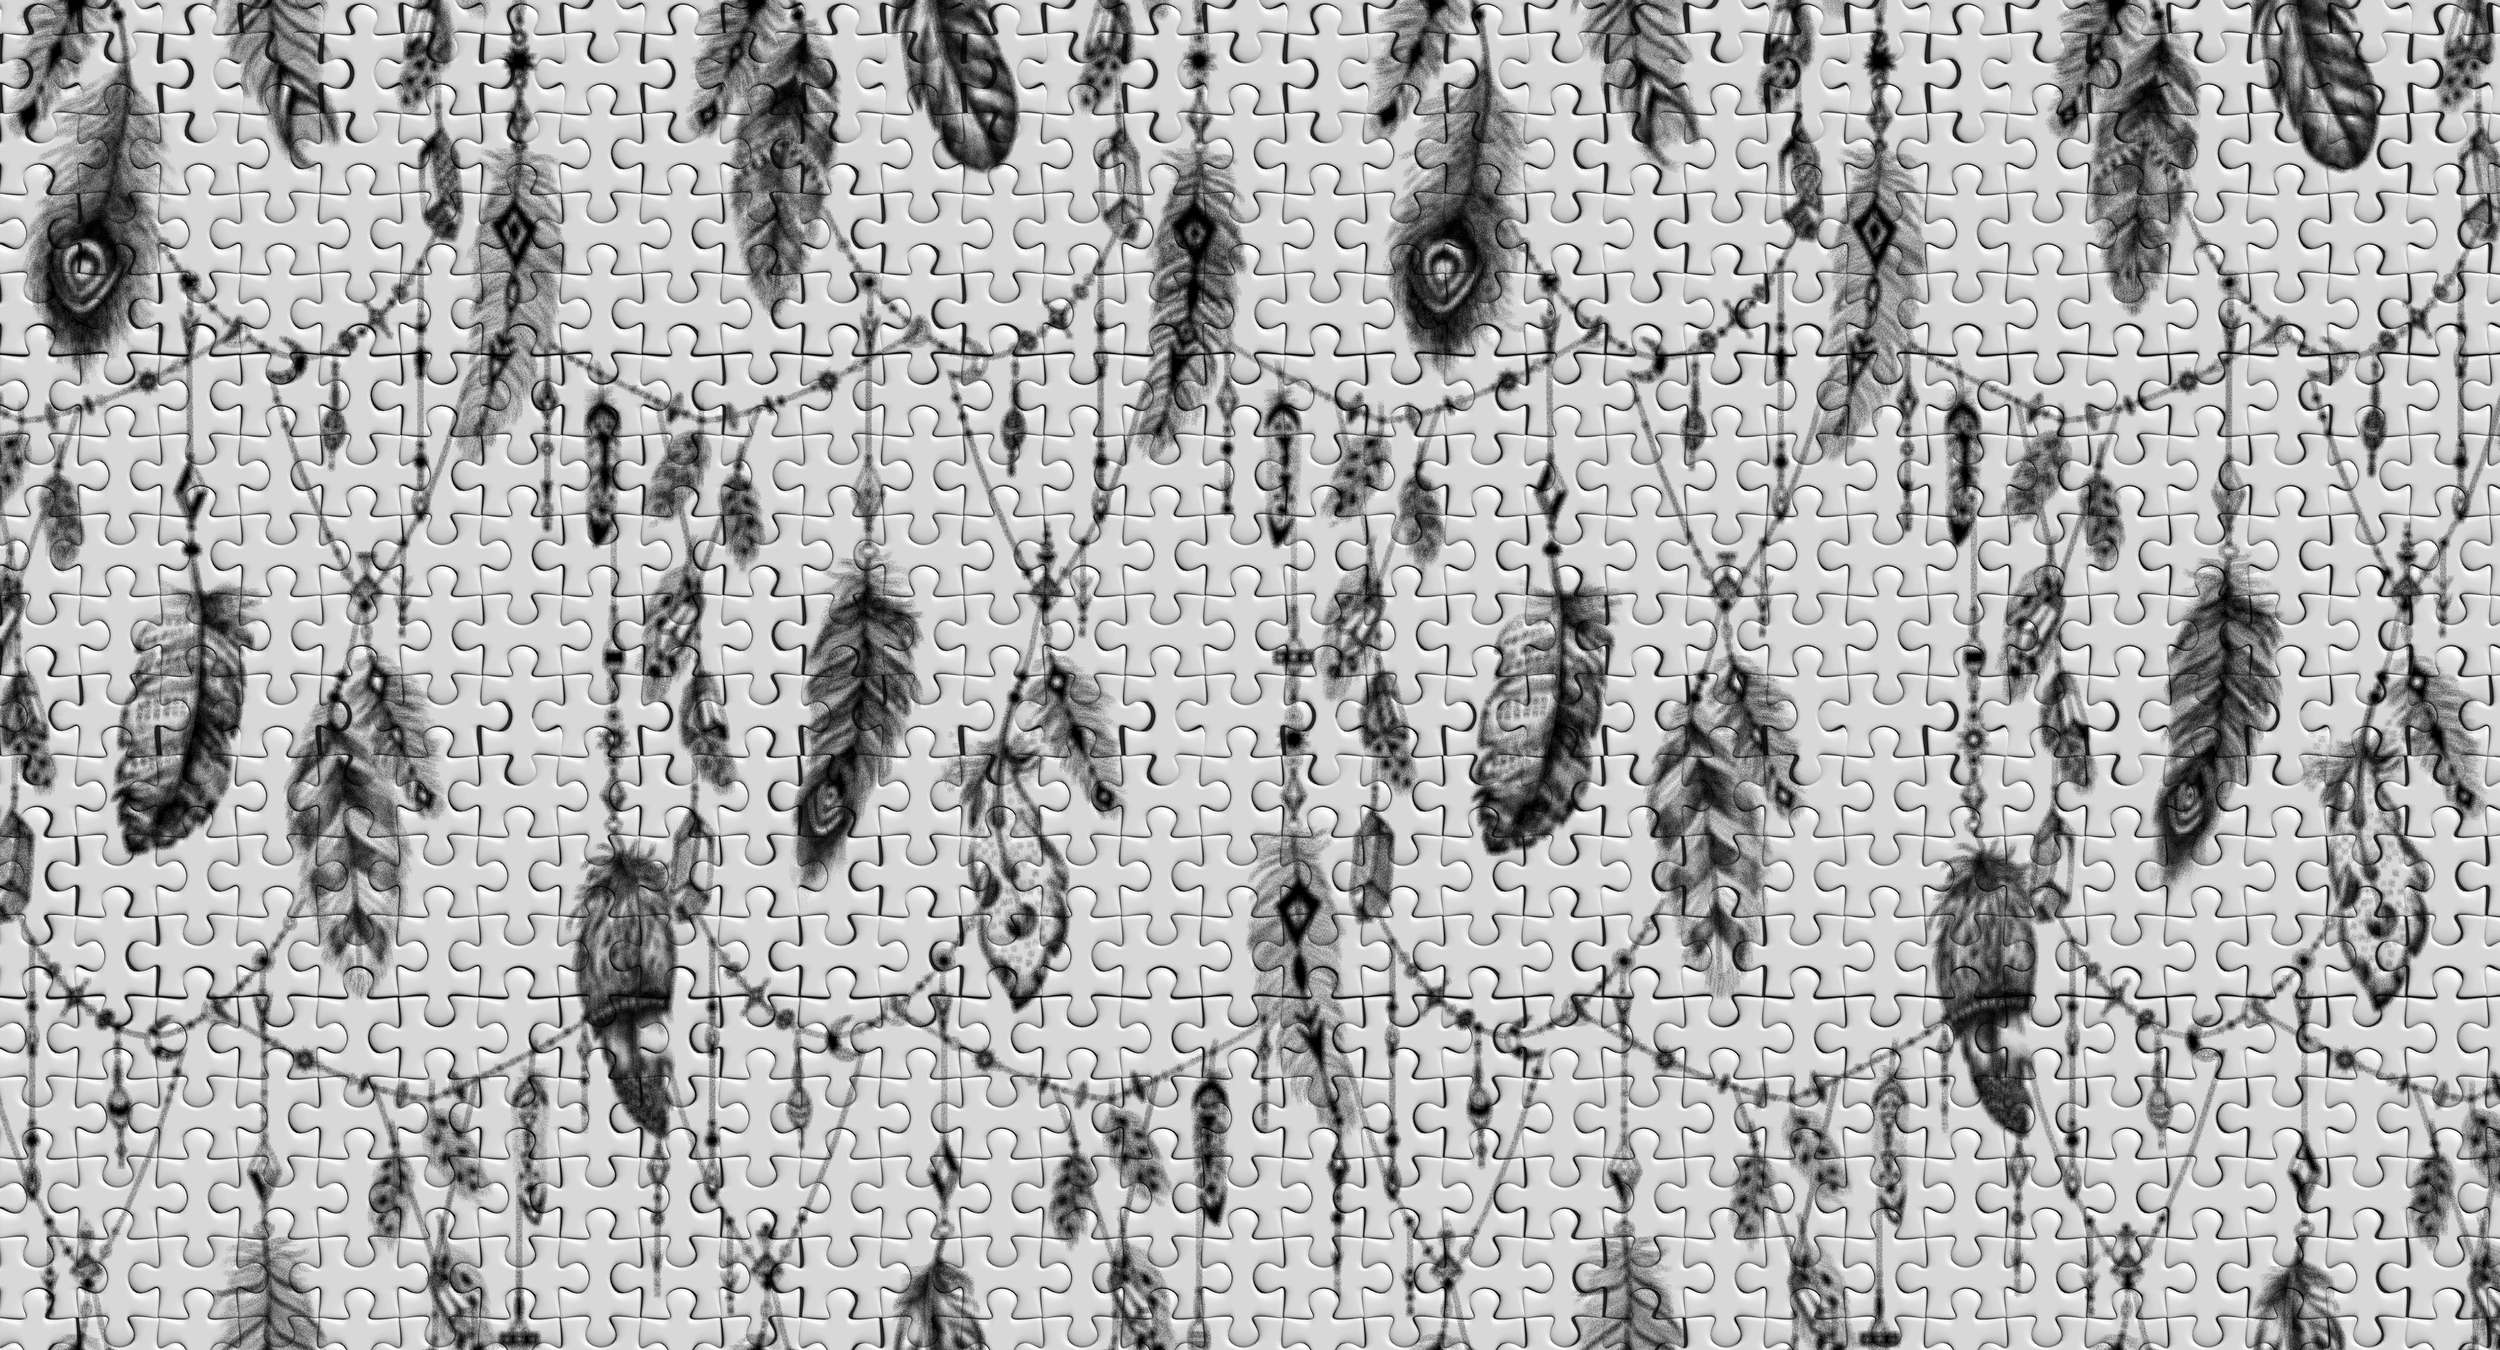             Boho photo wallpaper feathers & puzzle look in black and white - black, grey, white
        